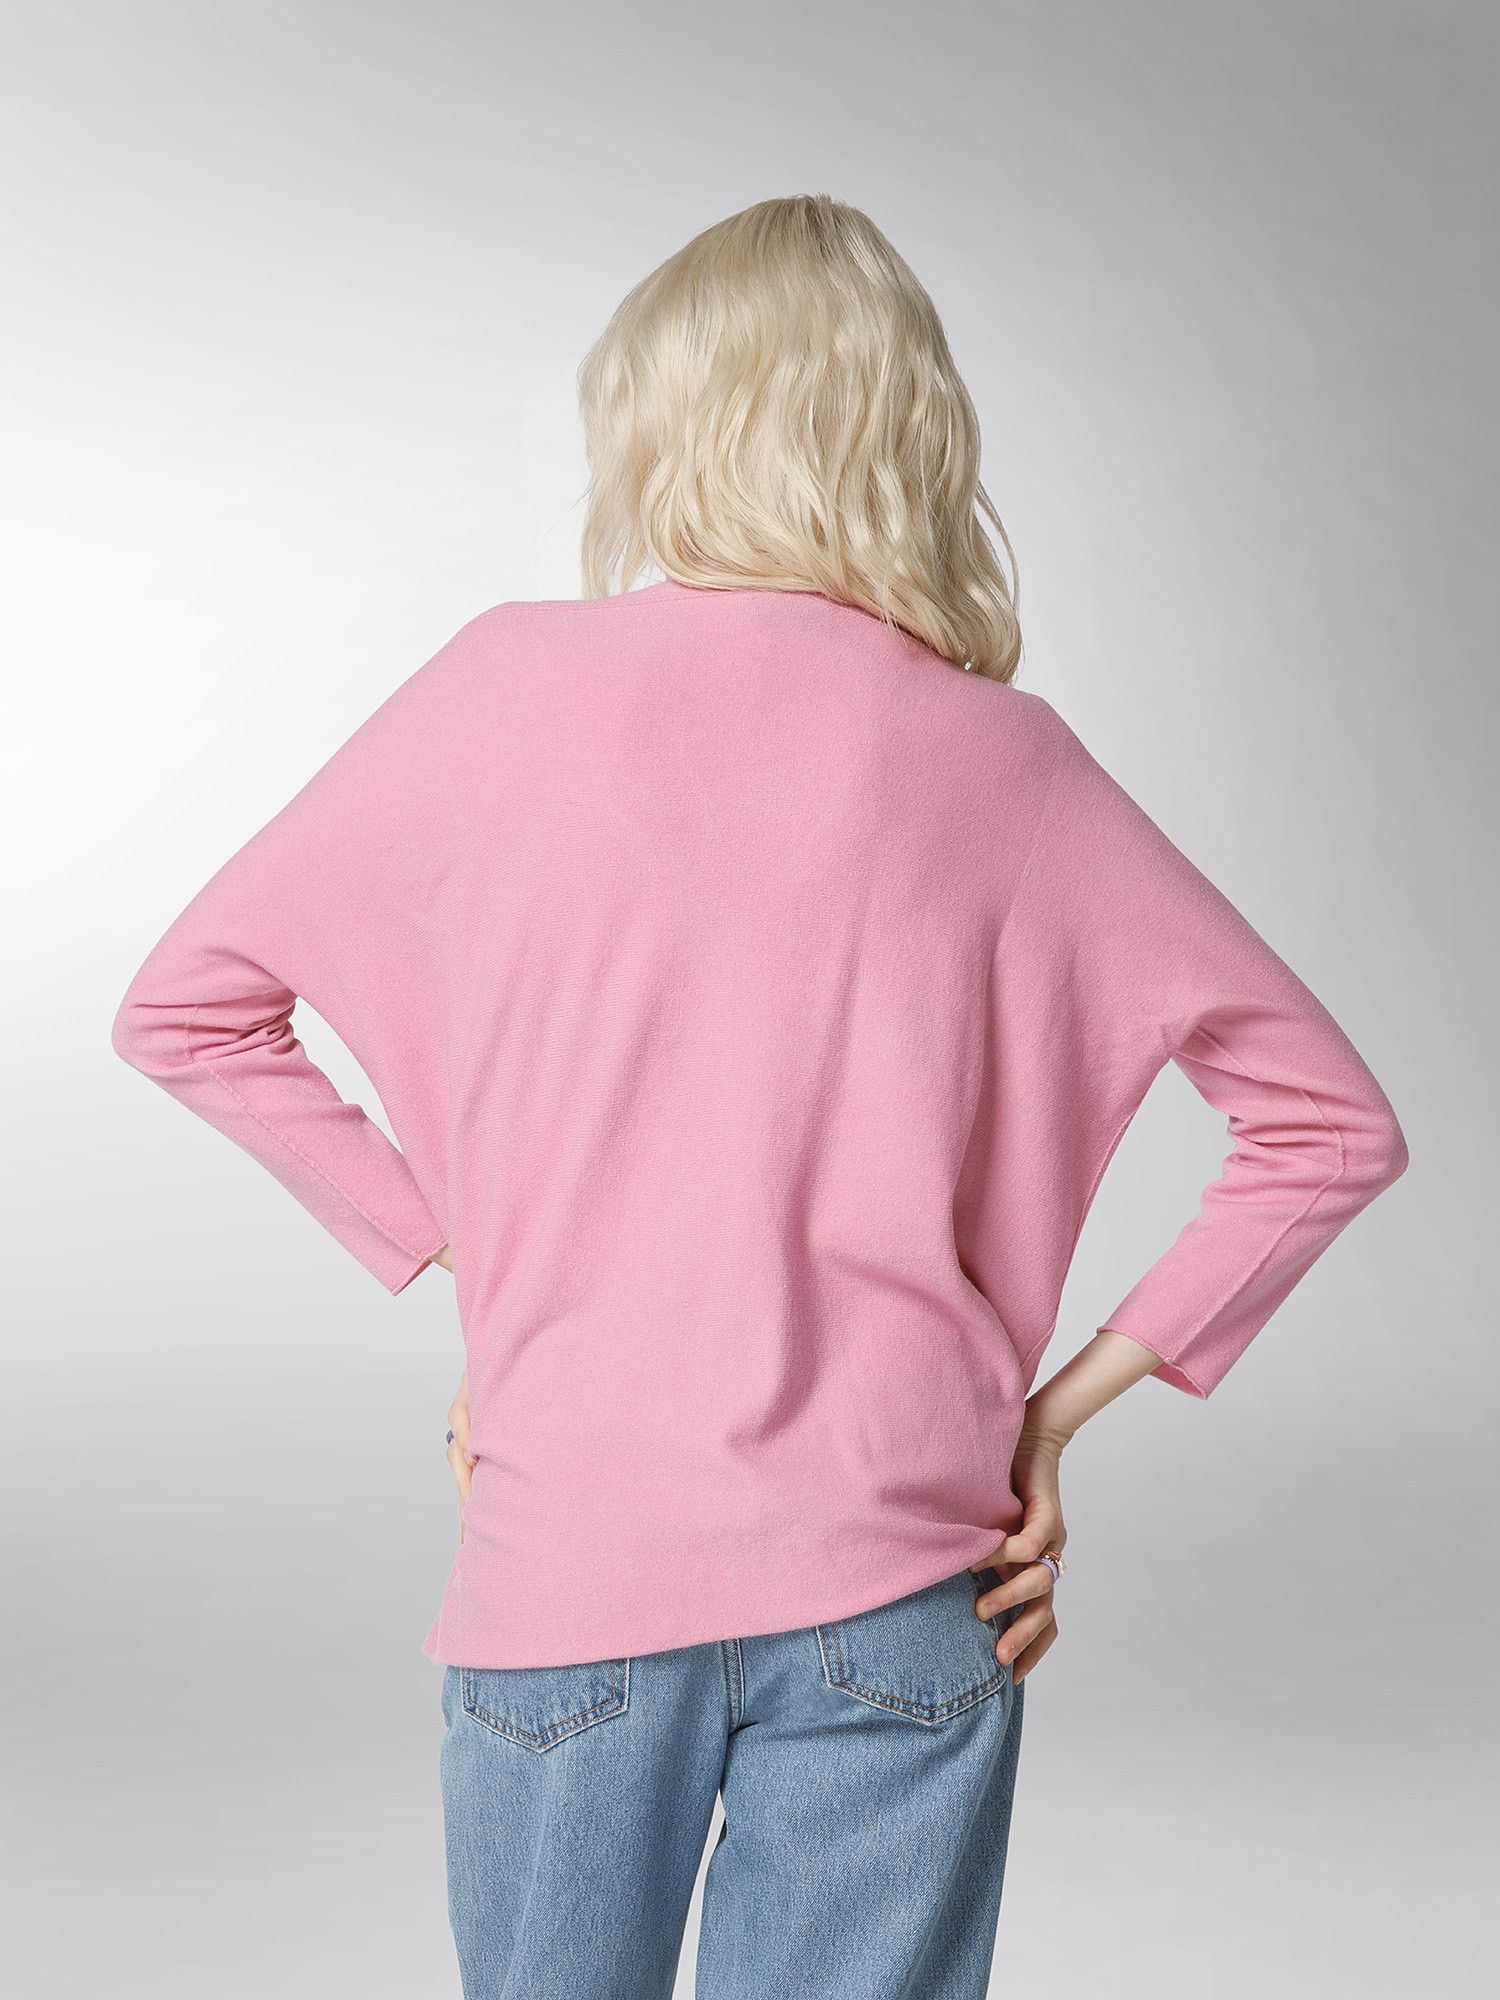 K Collection - Pullover, Pink Fuchsia, large image number 4